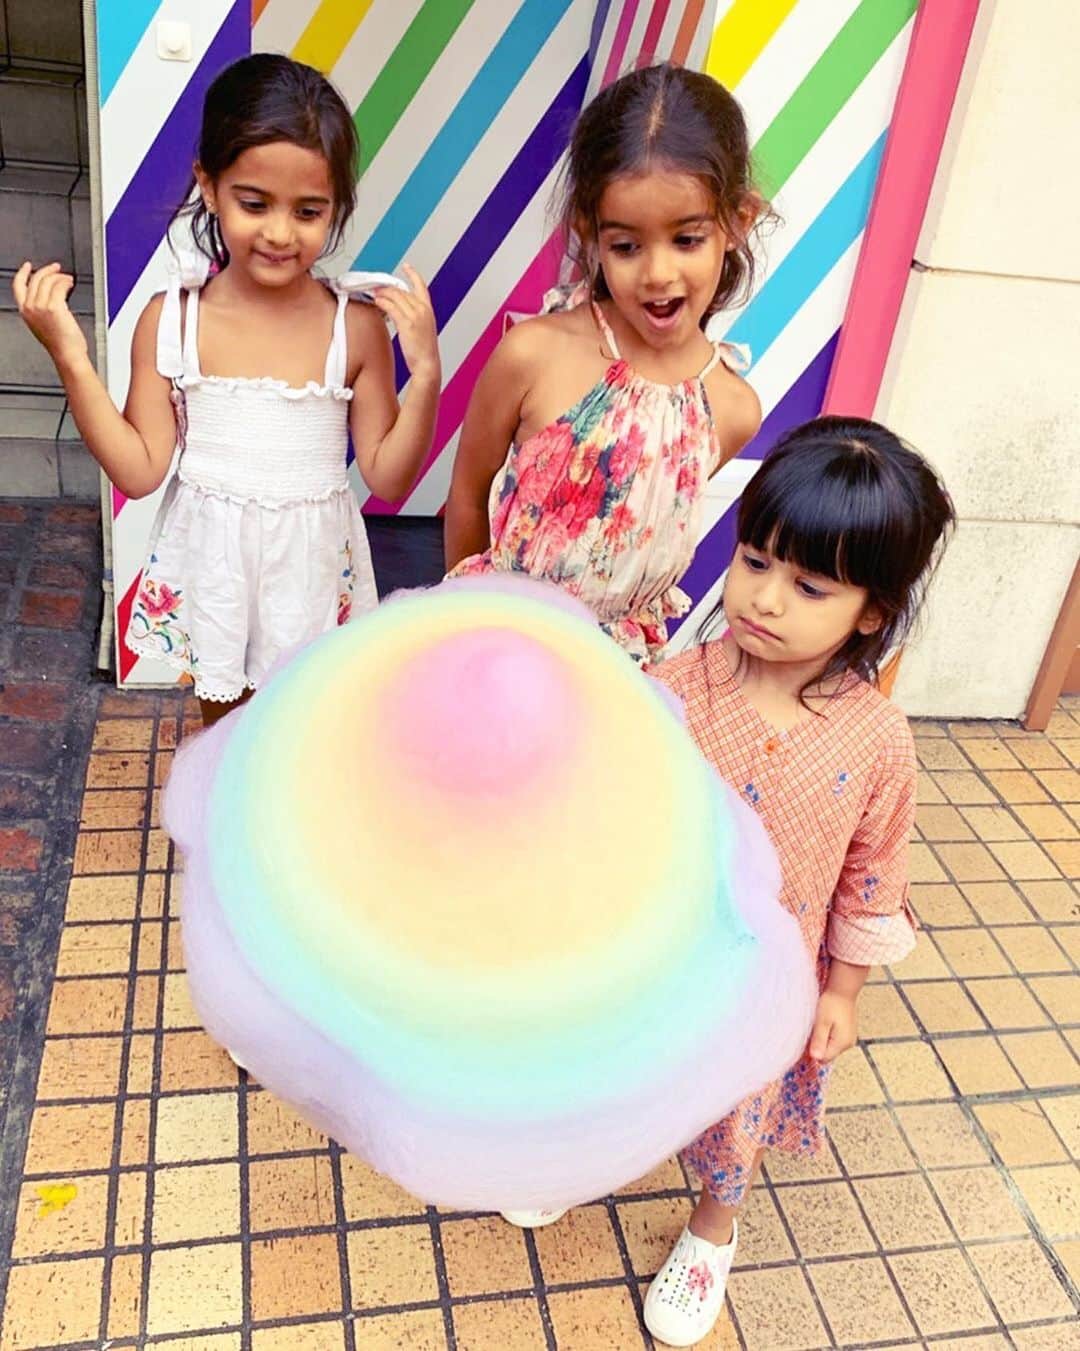 TOTTI CANDY FACTORYのインスタグラム：「👧🏻🍭👧🏻🍬👧🏻 Thank you for coming! ご来店ありがとうございます🥳 Photo by: @kavster7 #repost  #totticandy  #totticandyfactory  #rainbowcottoncandy #tokyo #harajuku #instagood」